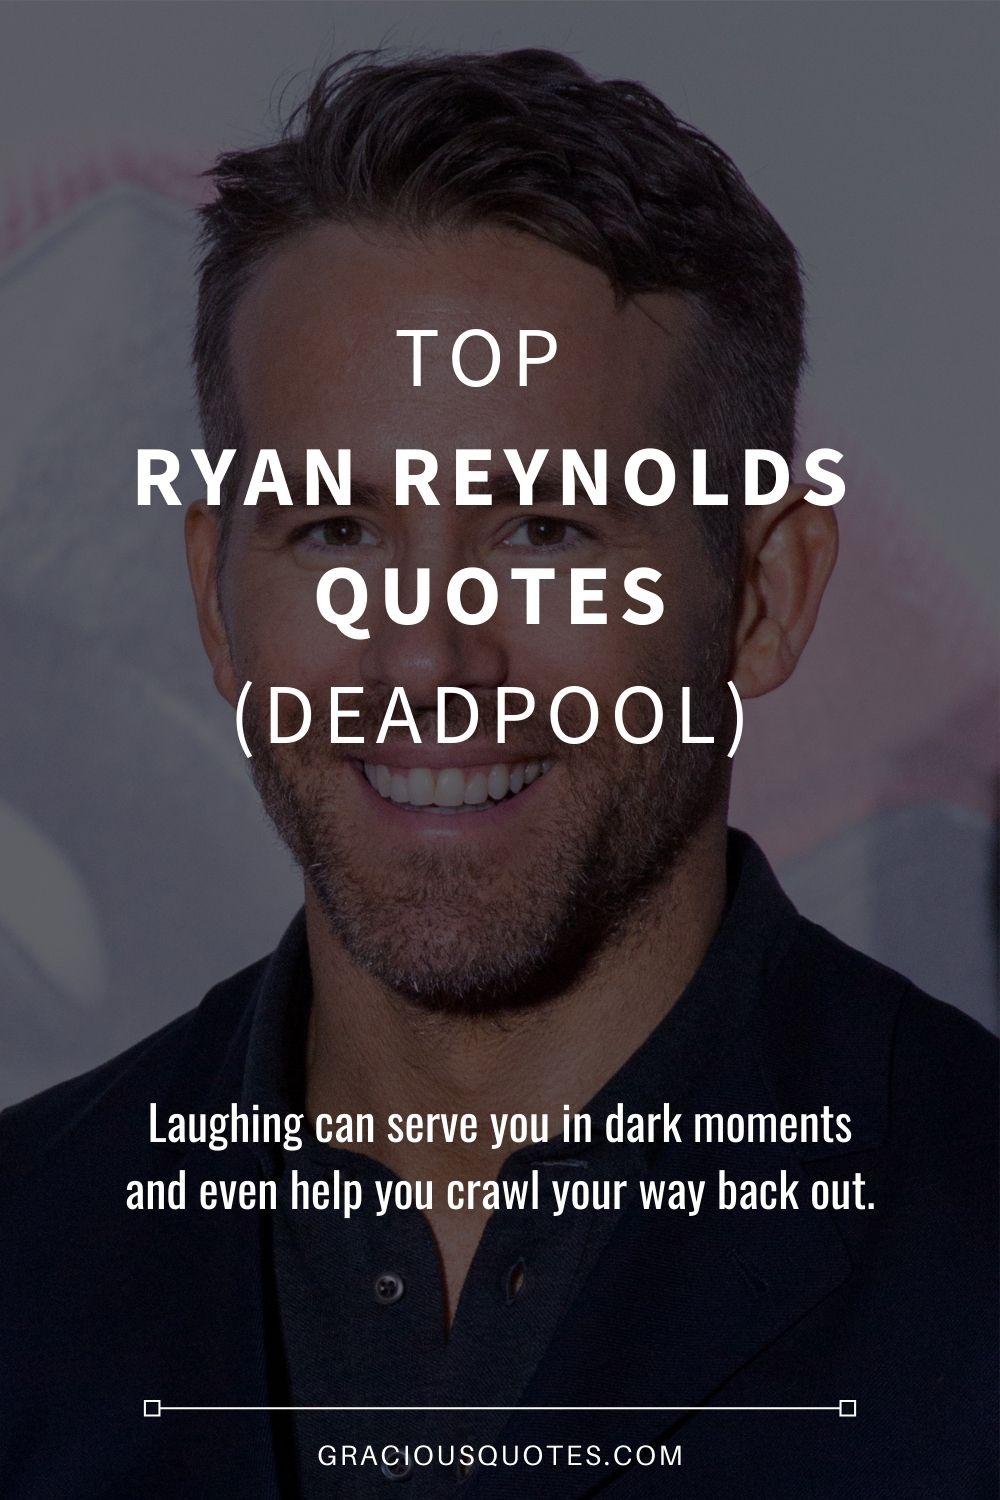 Top Ryan Reynolds Quotes (DEADPOOL) - Gracious Quotes